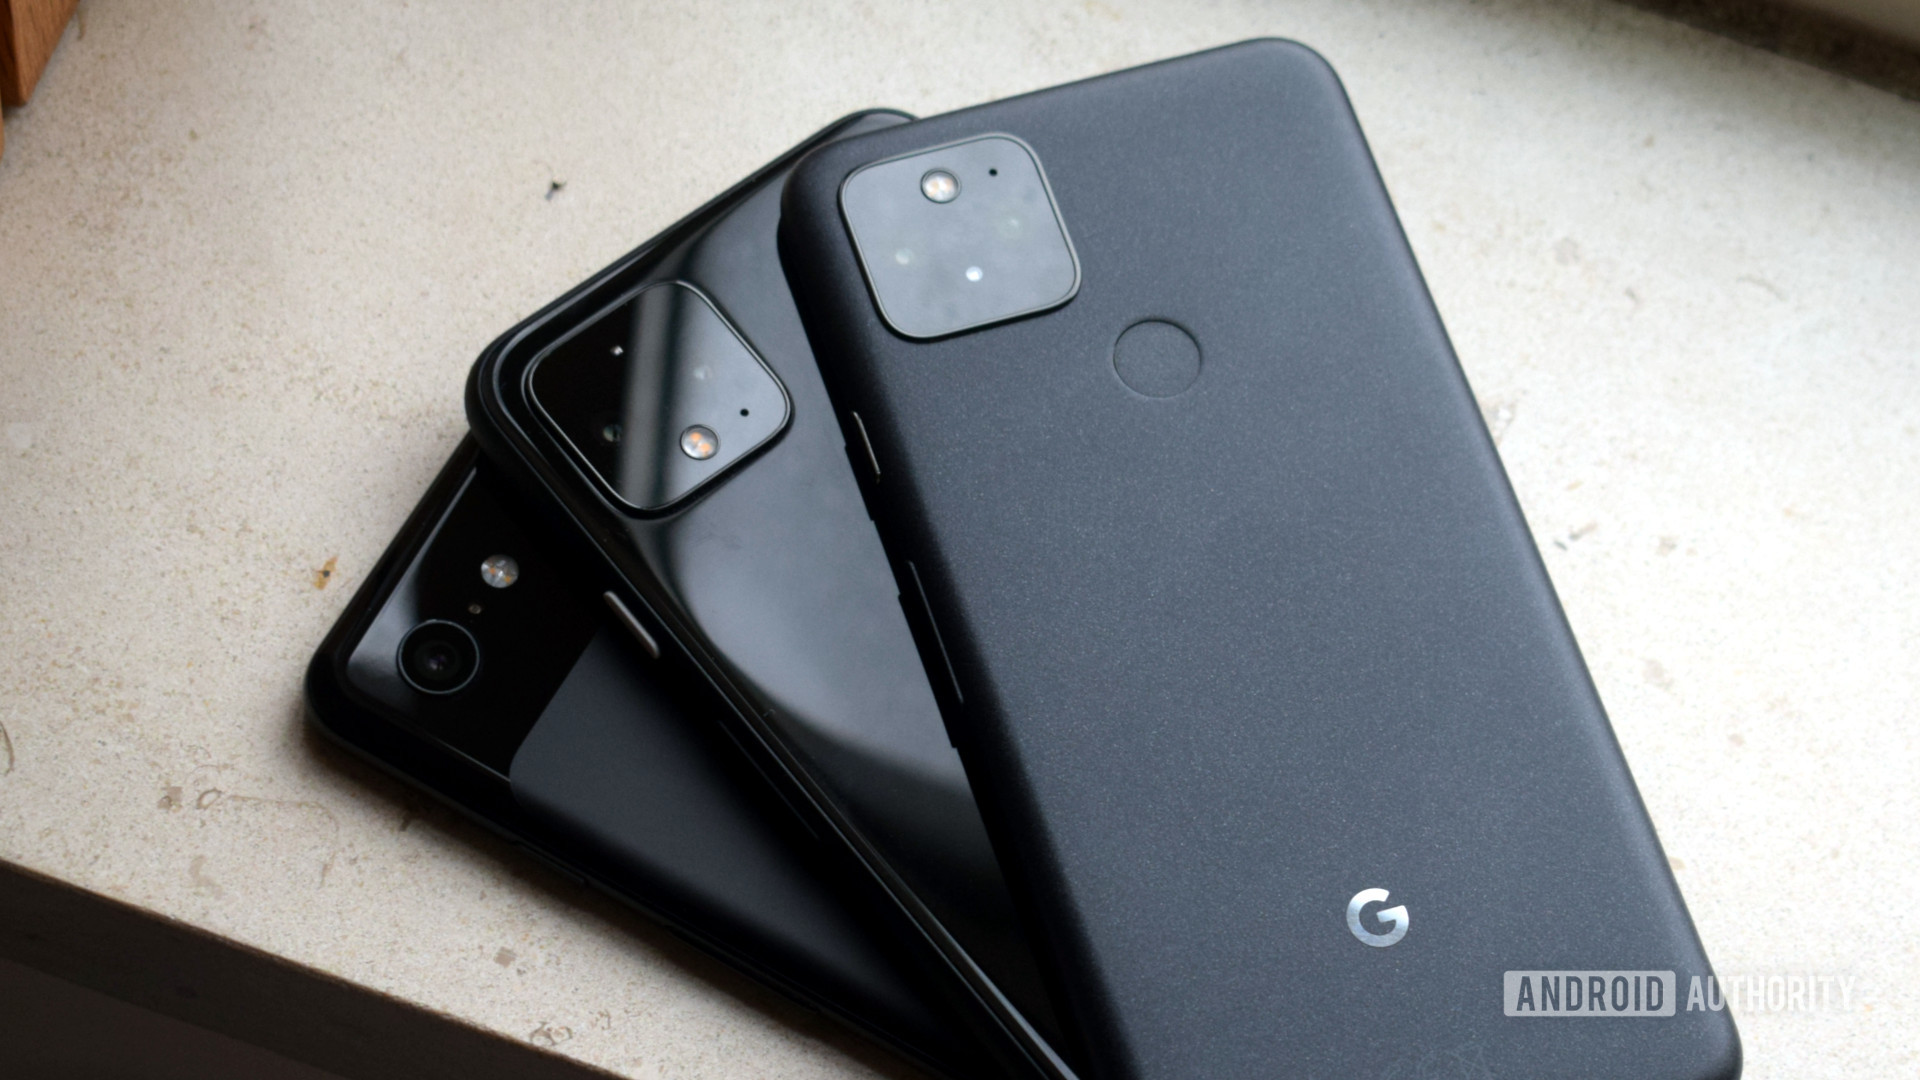 The best thing Google can do for the Pixel line is stay consistent